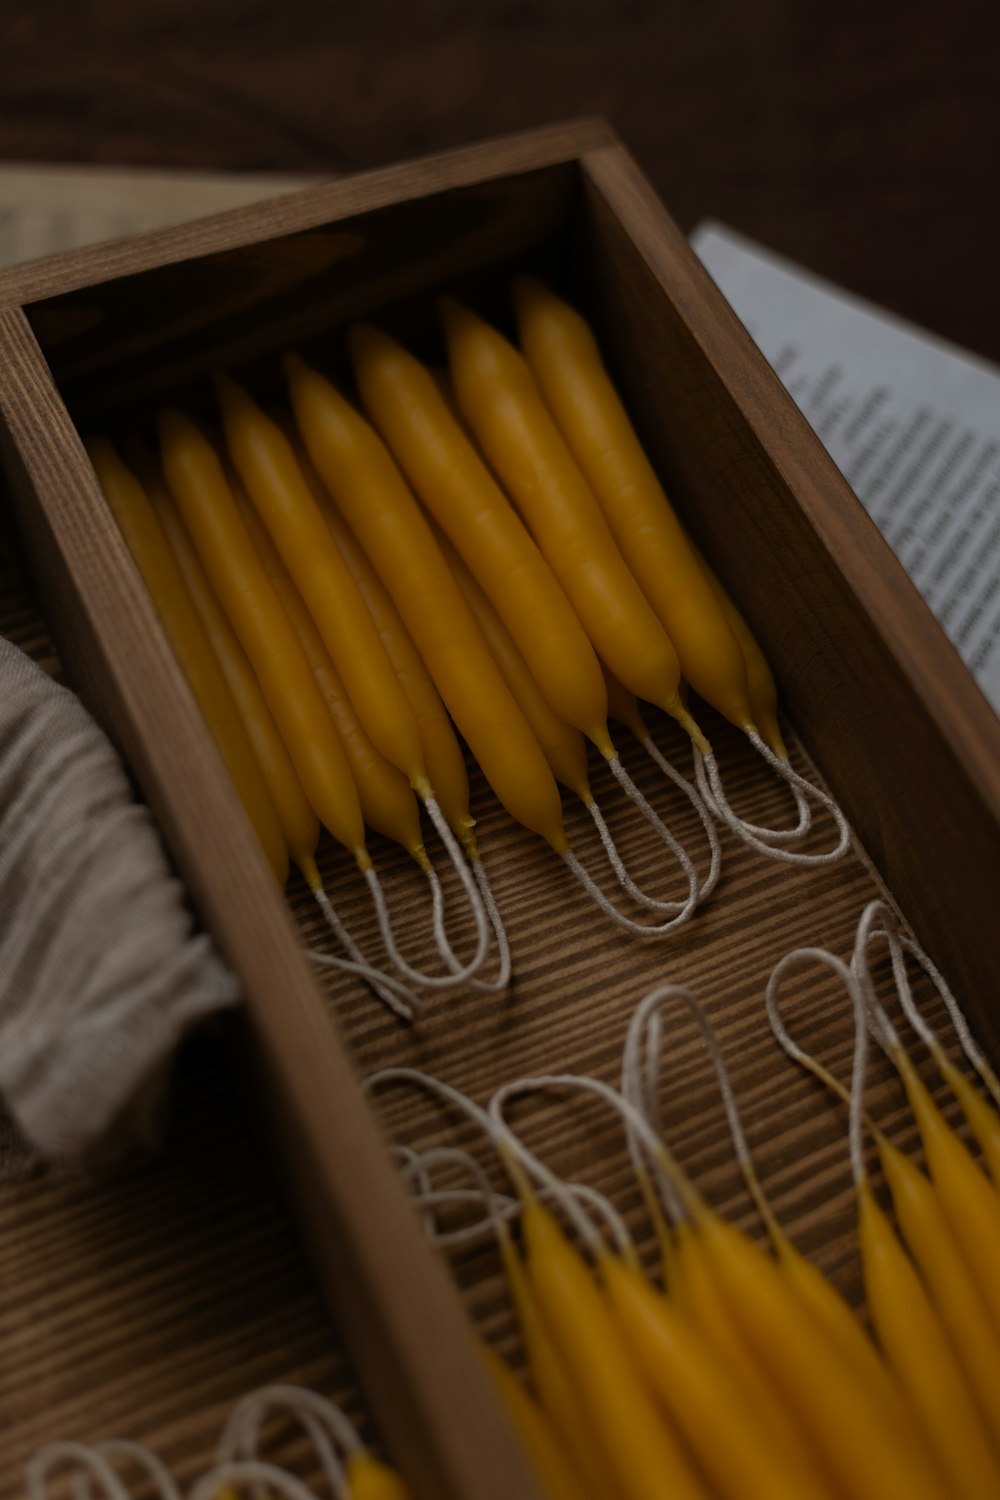 a box filled with yellow candles next to a book